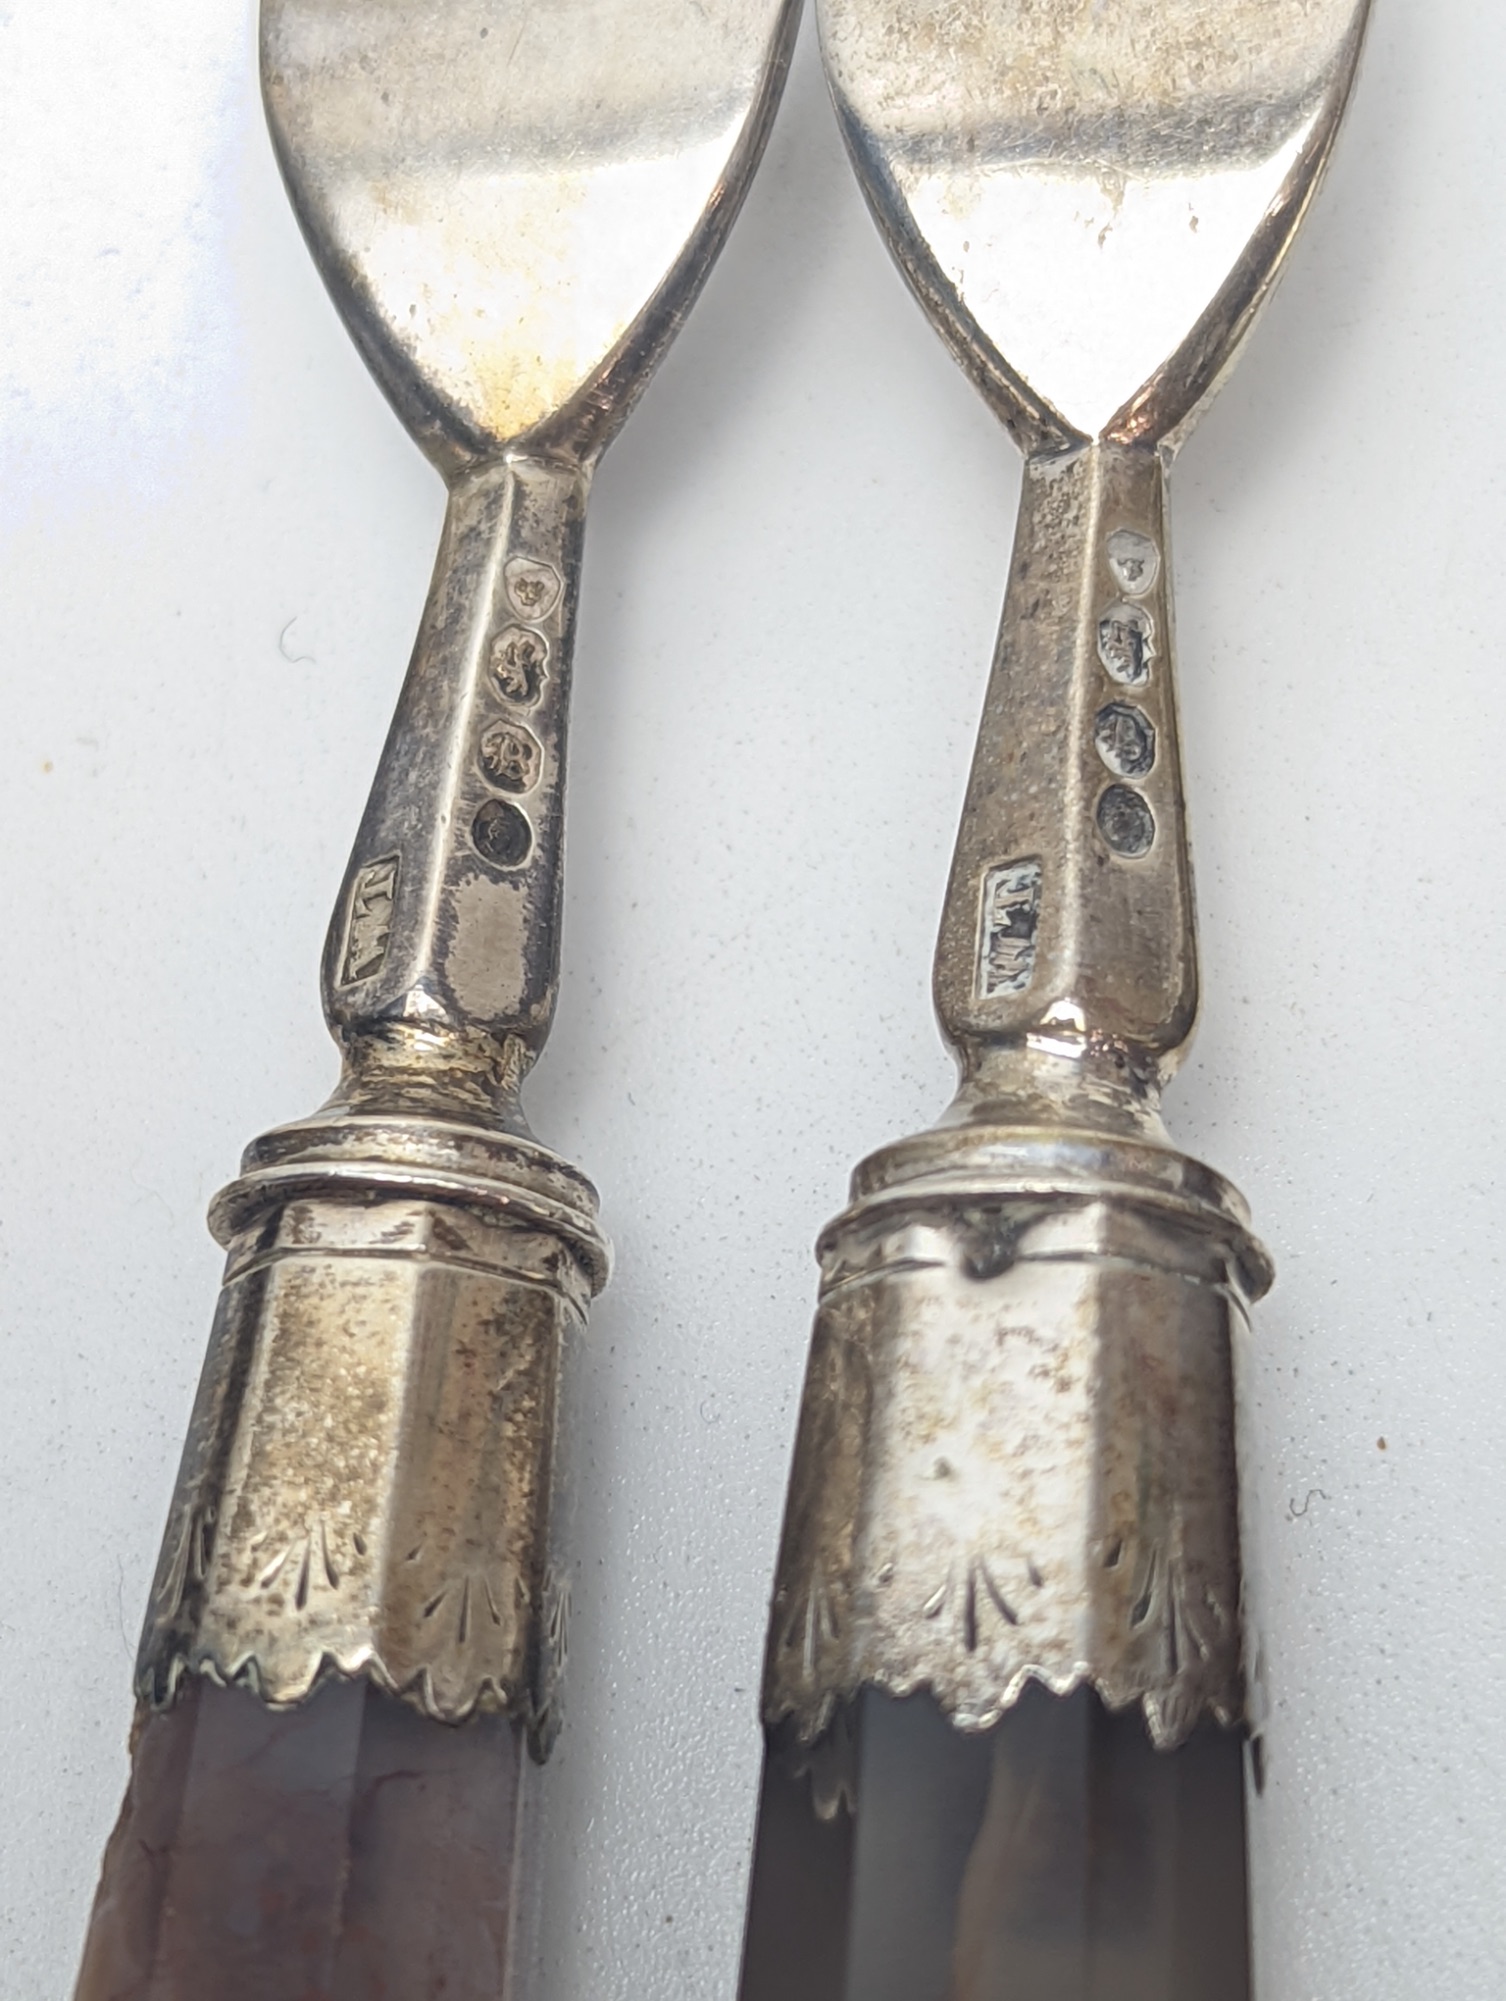 A set of 8 pairs of Victorian silver and stone handled knives and forks, hallmarked London, 1827, - Image 3 of 4